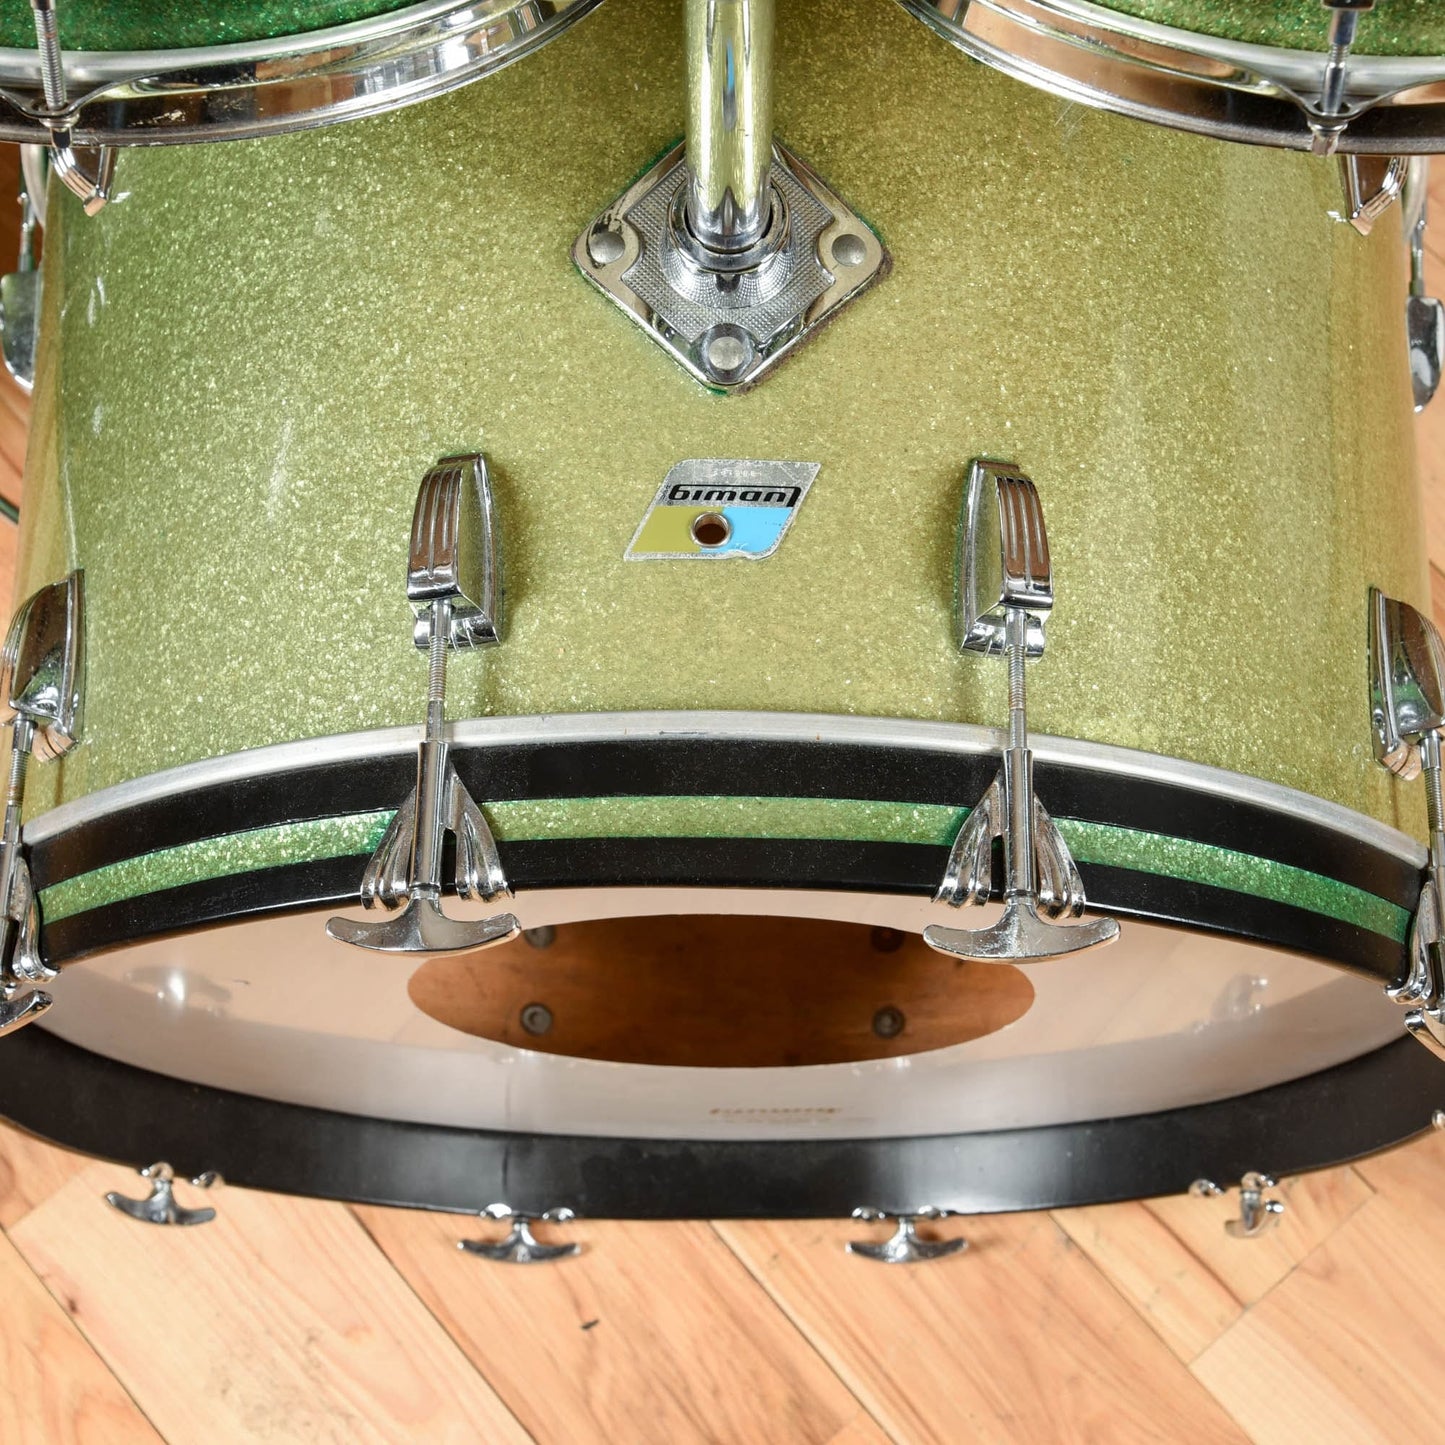 Ludwig Ludwig 12/13/16/22 1970's 4pc Drum Kit Green Sparkle Drums and Percussion / Acoustic Drums / Full Acoustic Kits